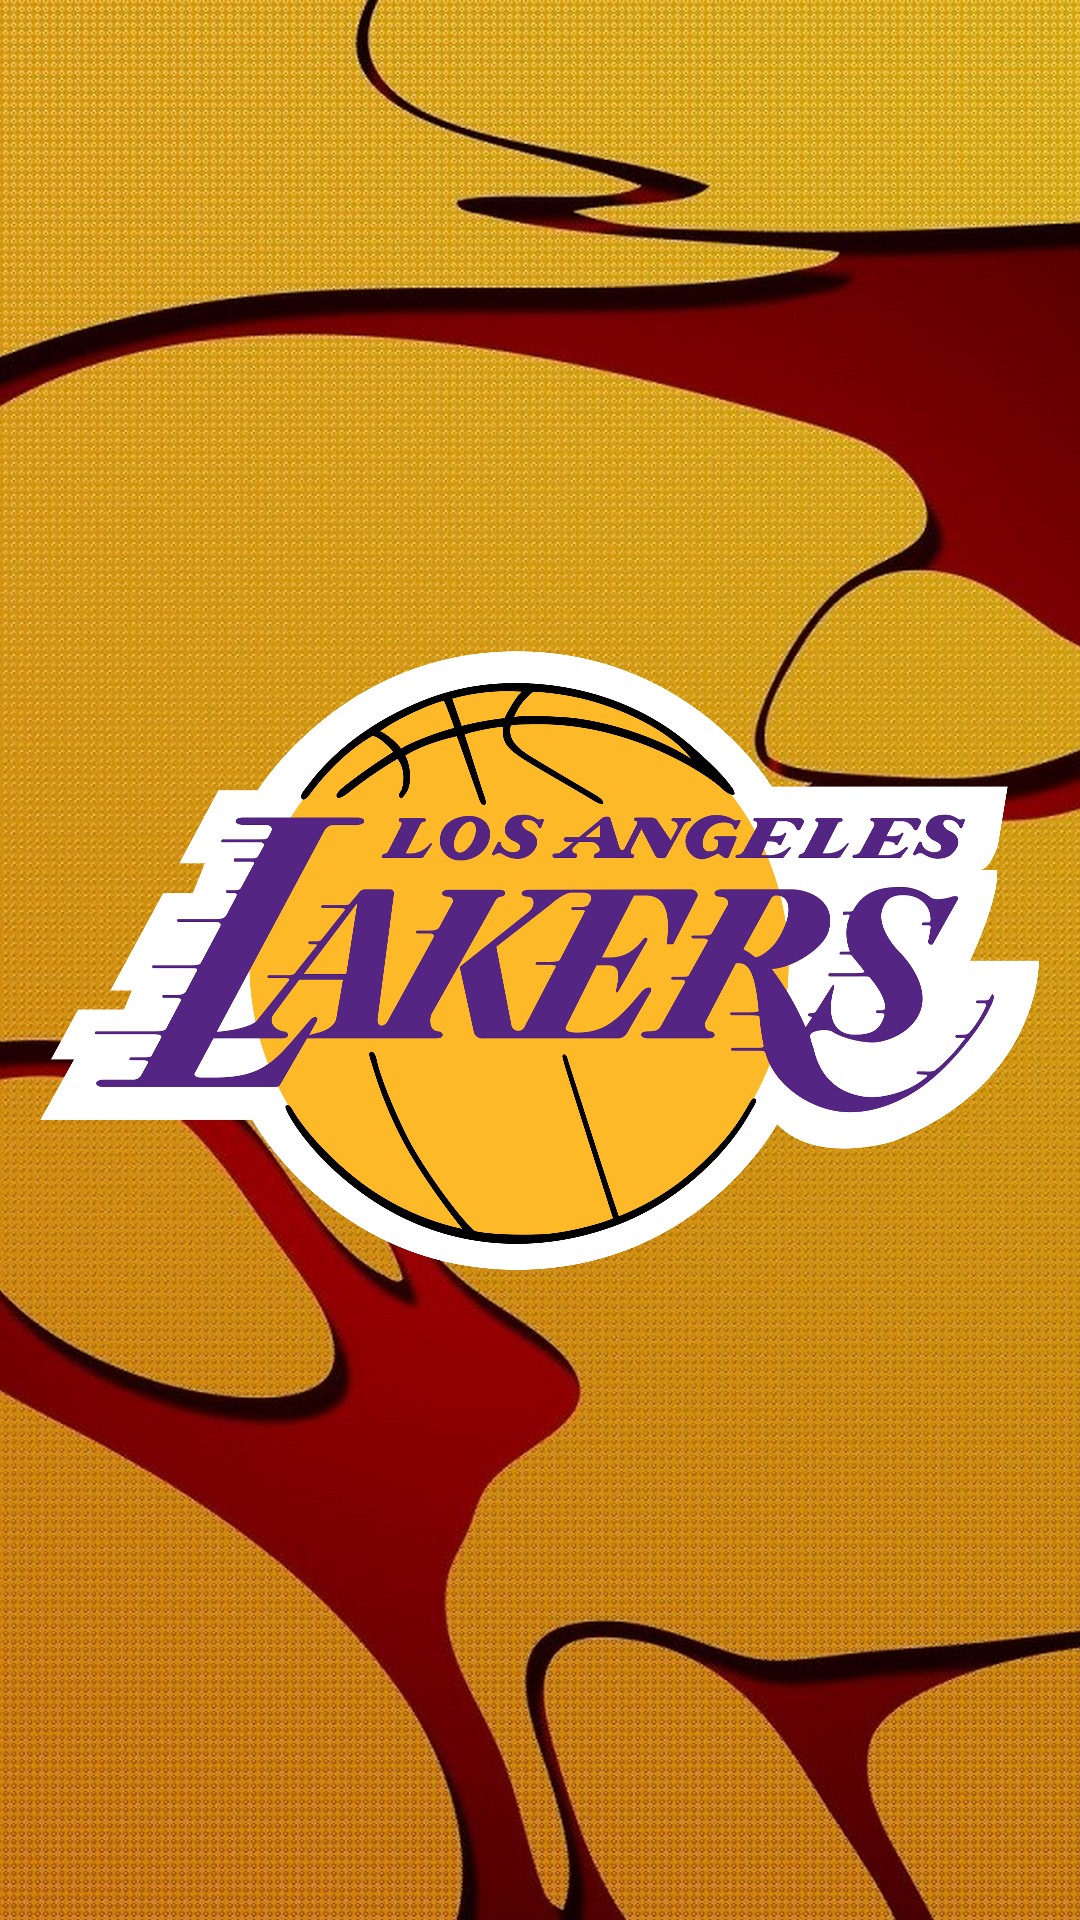 La Lakers Iphone 6s Plus Wallpaper With High Resolution Poster 1080x1920 Wallpaper Teahub Io